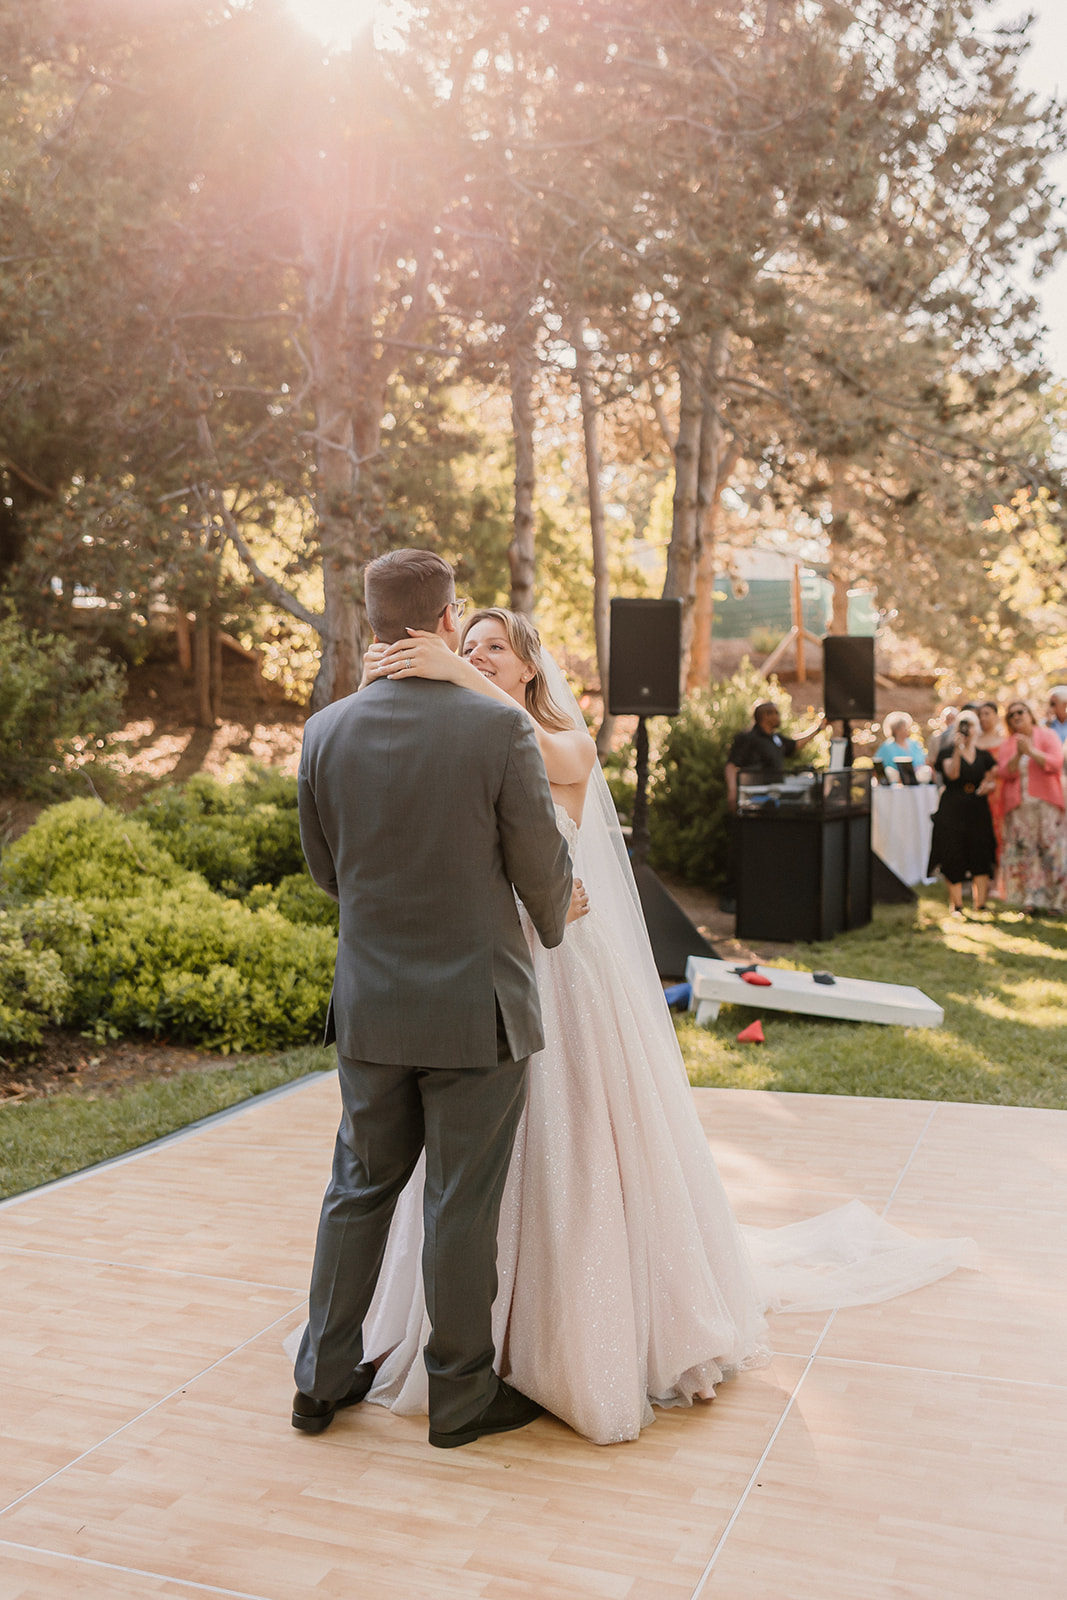 A couple, wearing a suit and a gown, share a kiss on an outdoor dance floor surrounded by trees and greenery, under the sunlight at their wedding at the gardens in heather farms